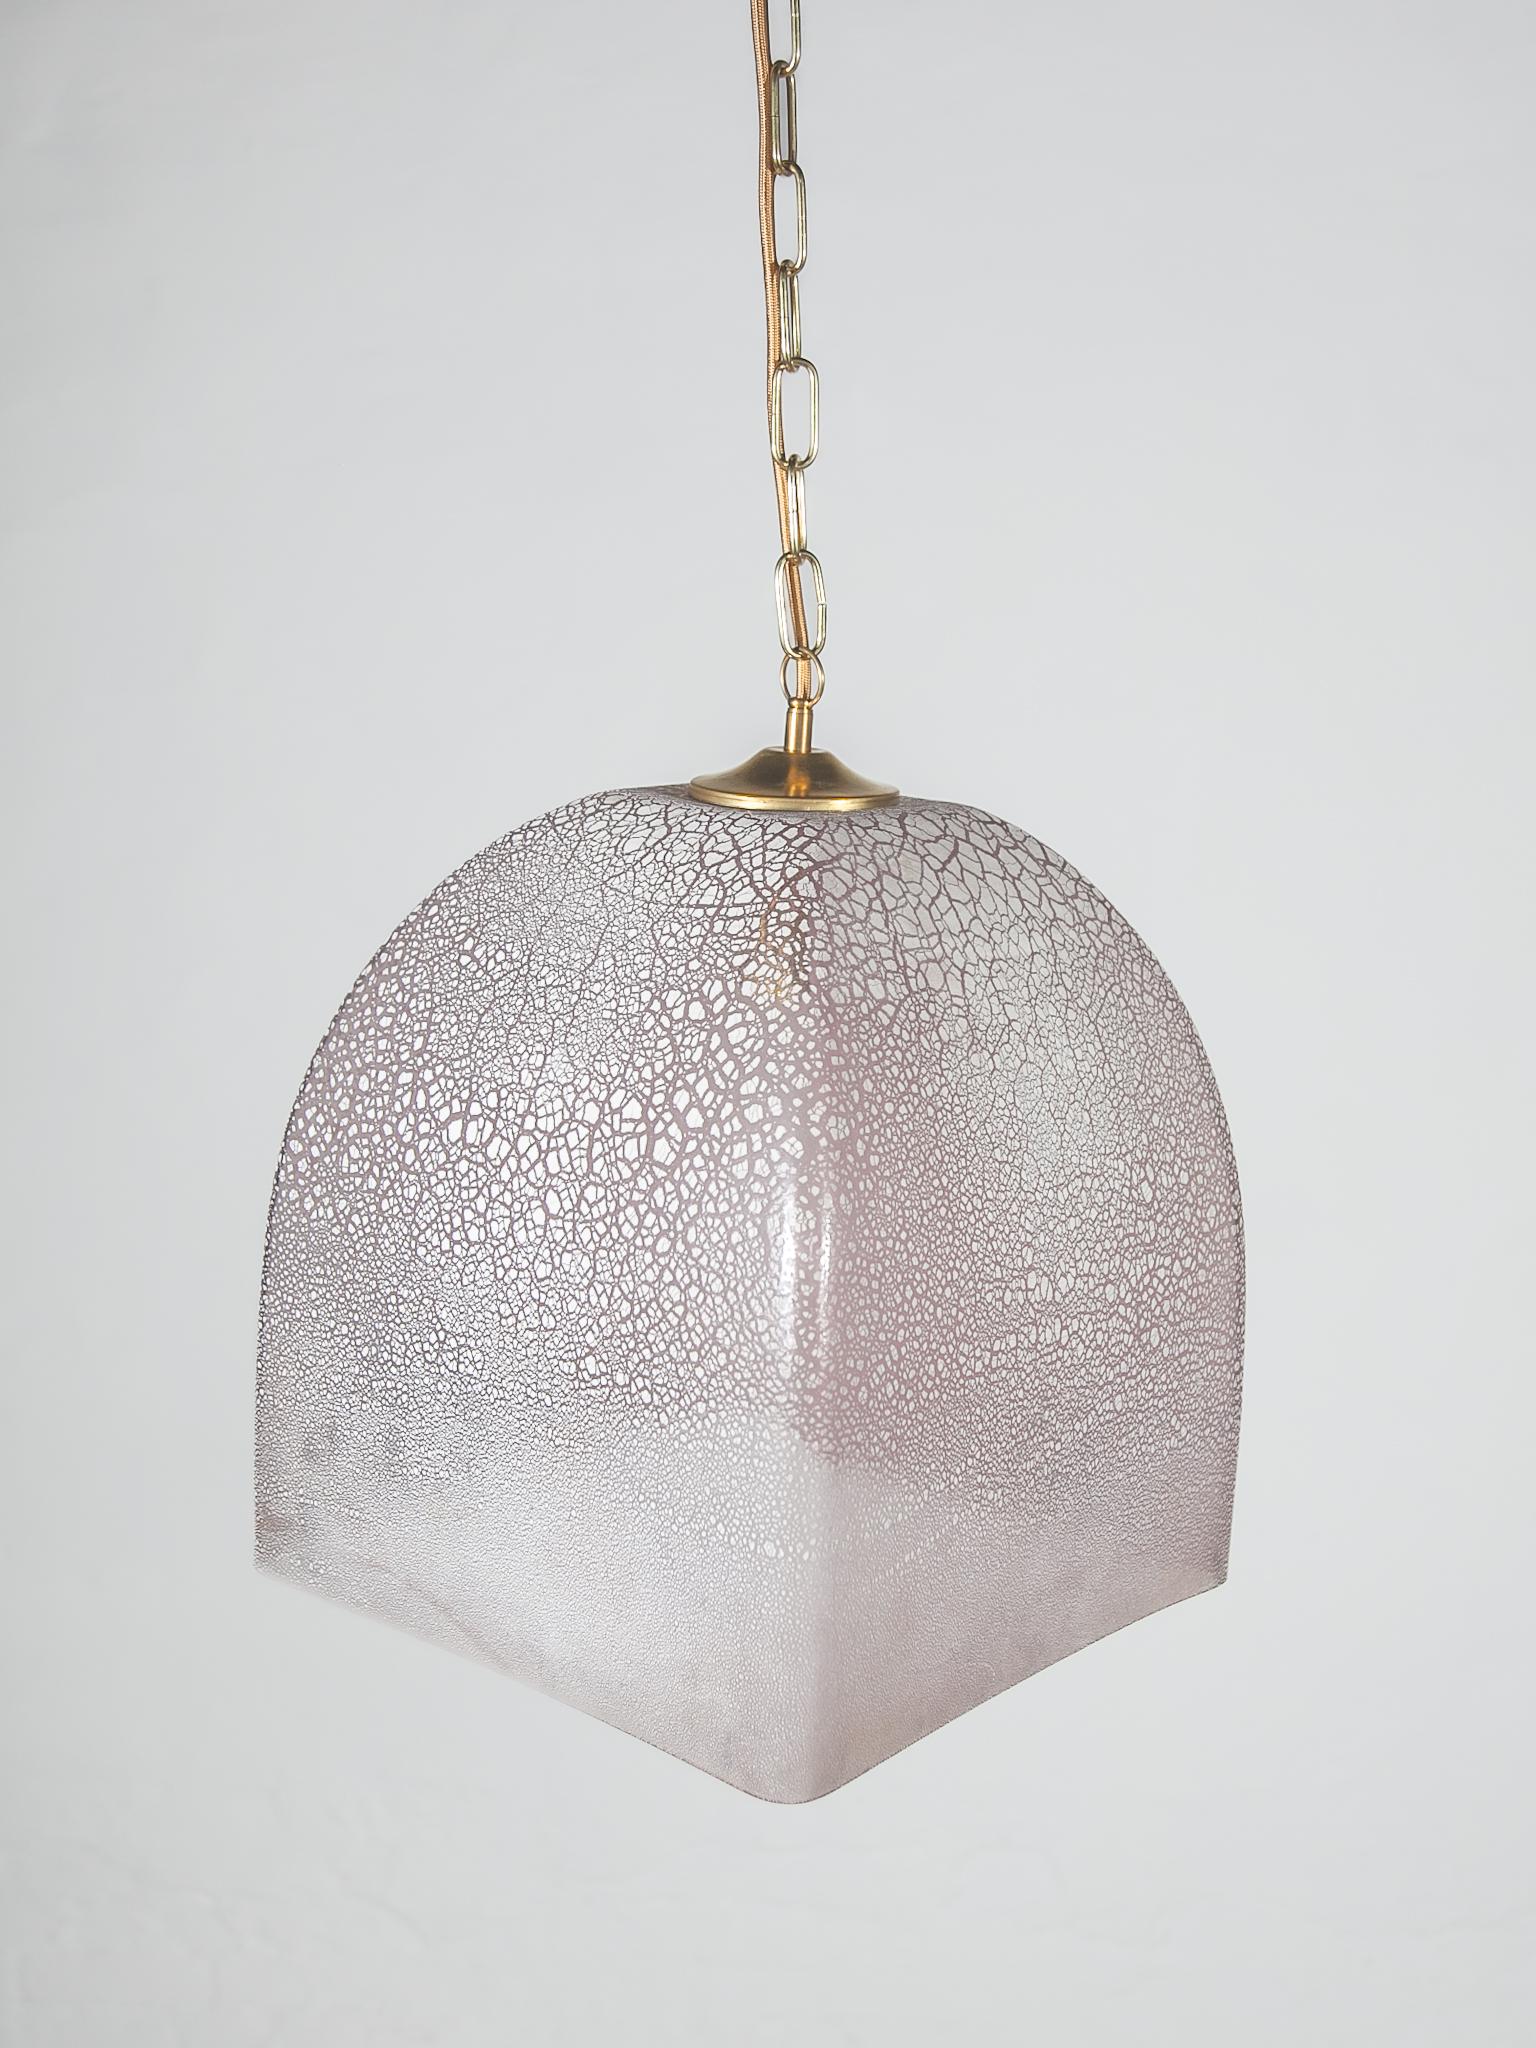 Pink Glass Textured Pendant designed by Alfredo Barbini, Italy 2